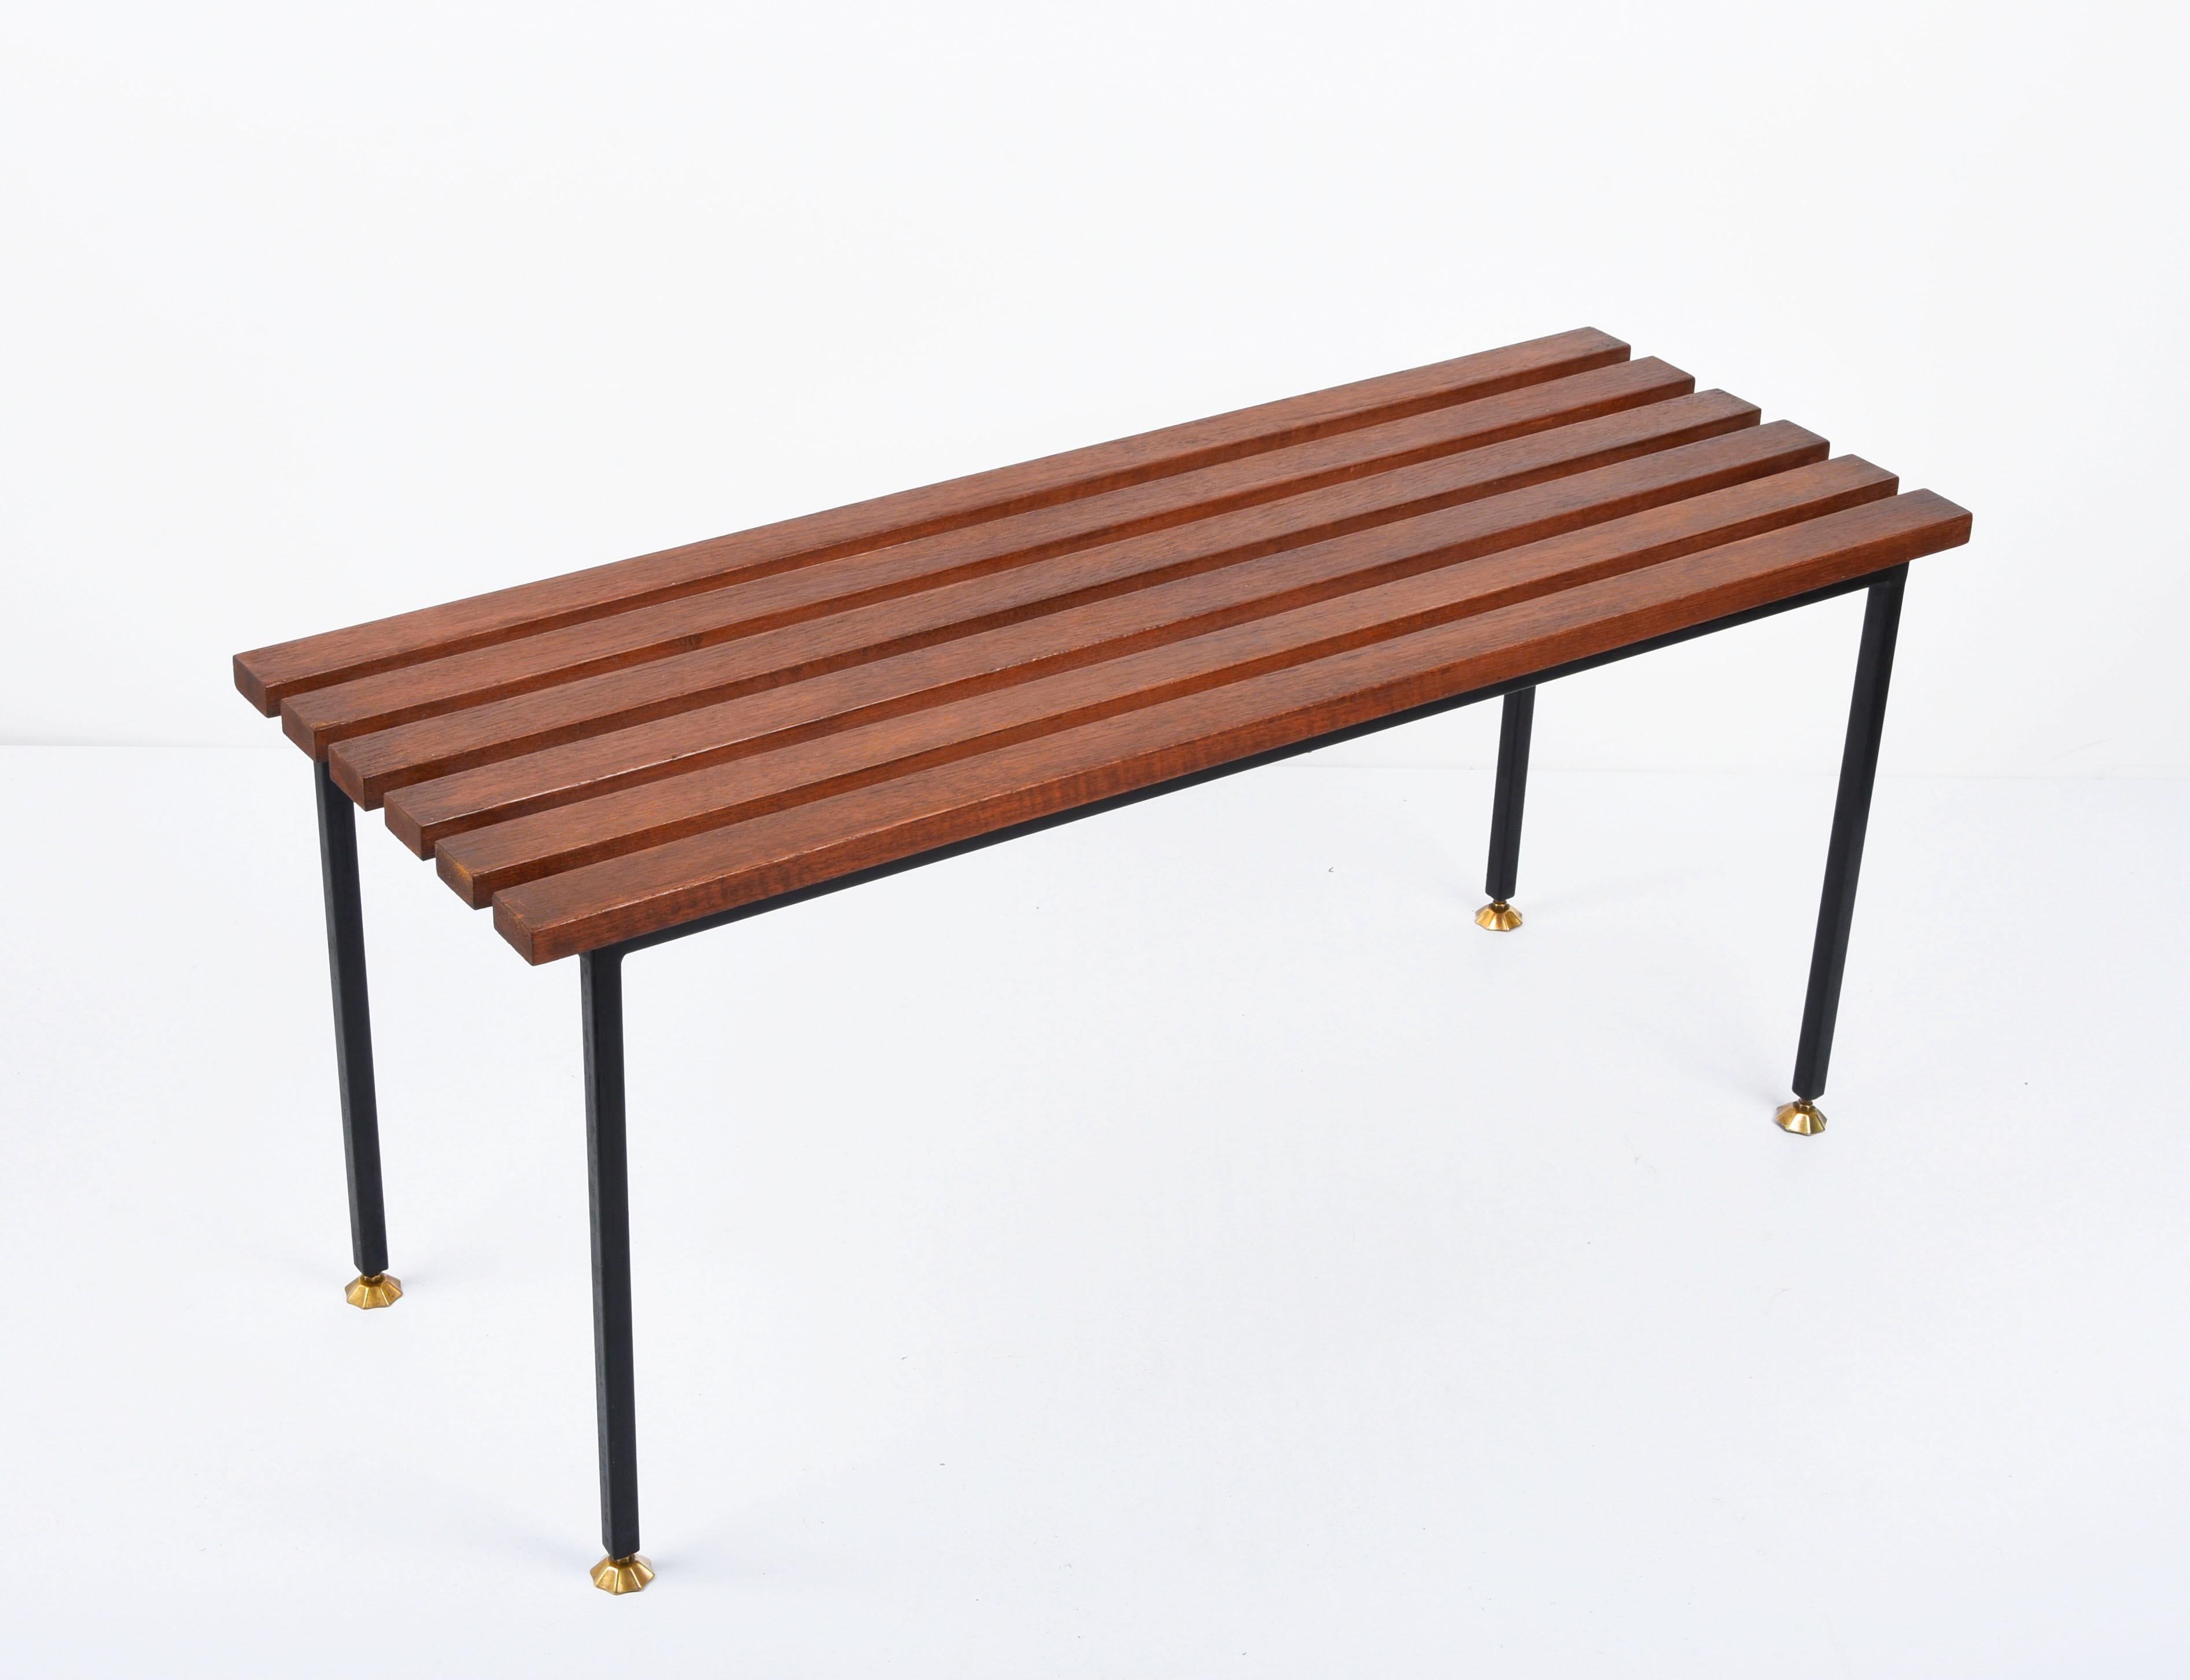 Midcentury Teak and Black Enameled Metal Italian Bench with Brass Feet, 1960s For Sale 4